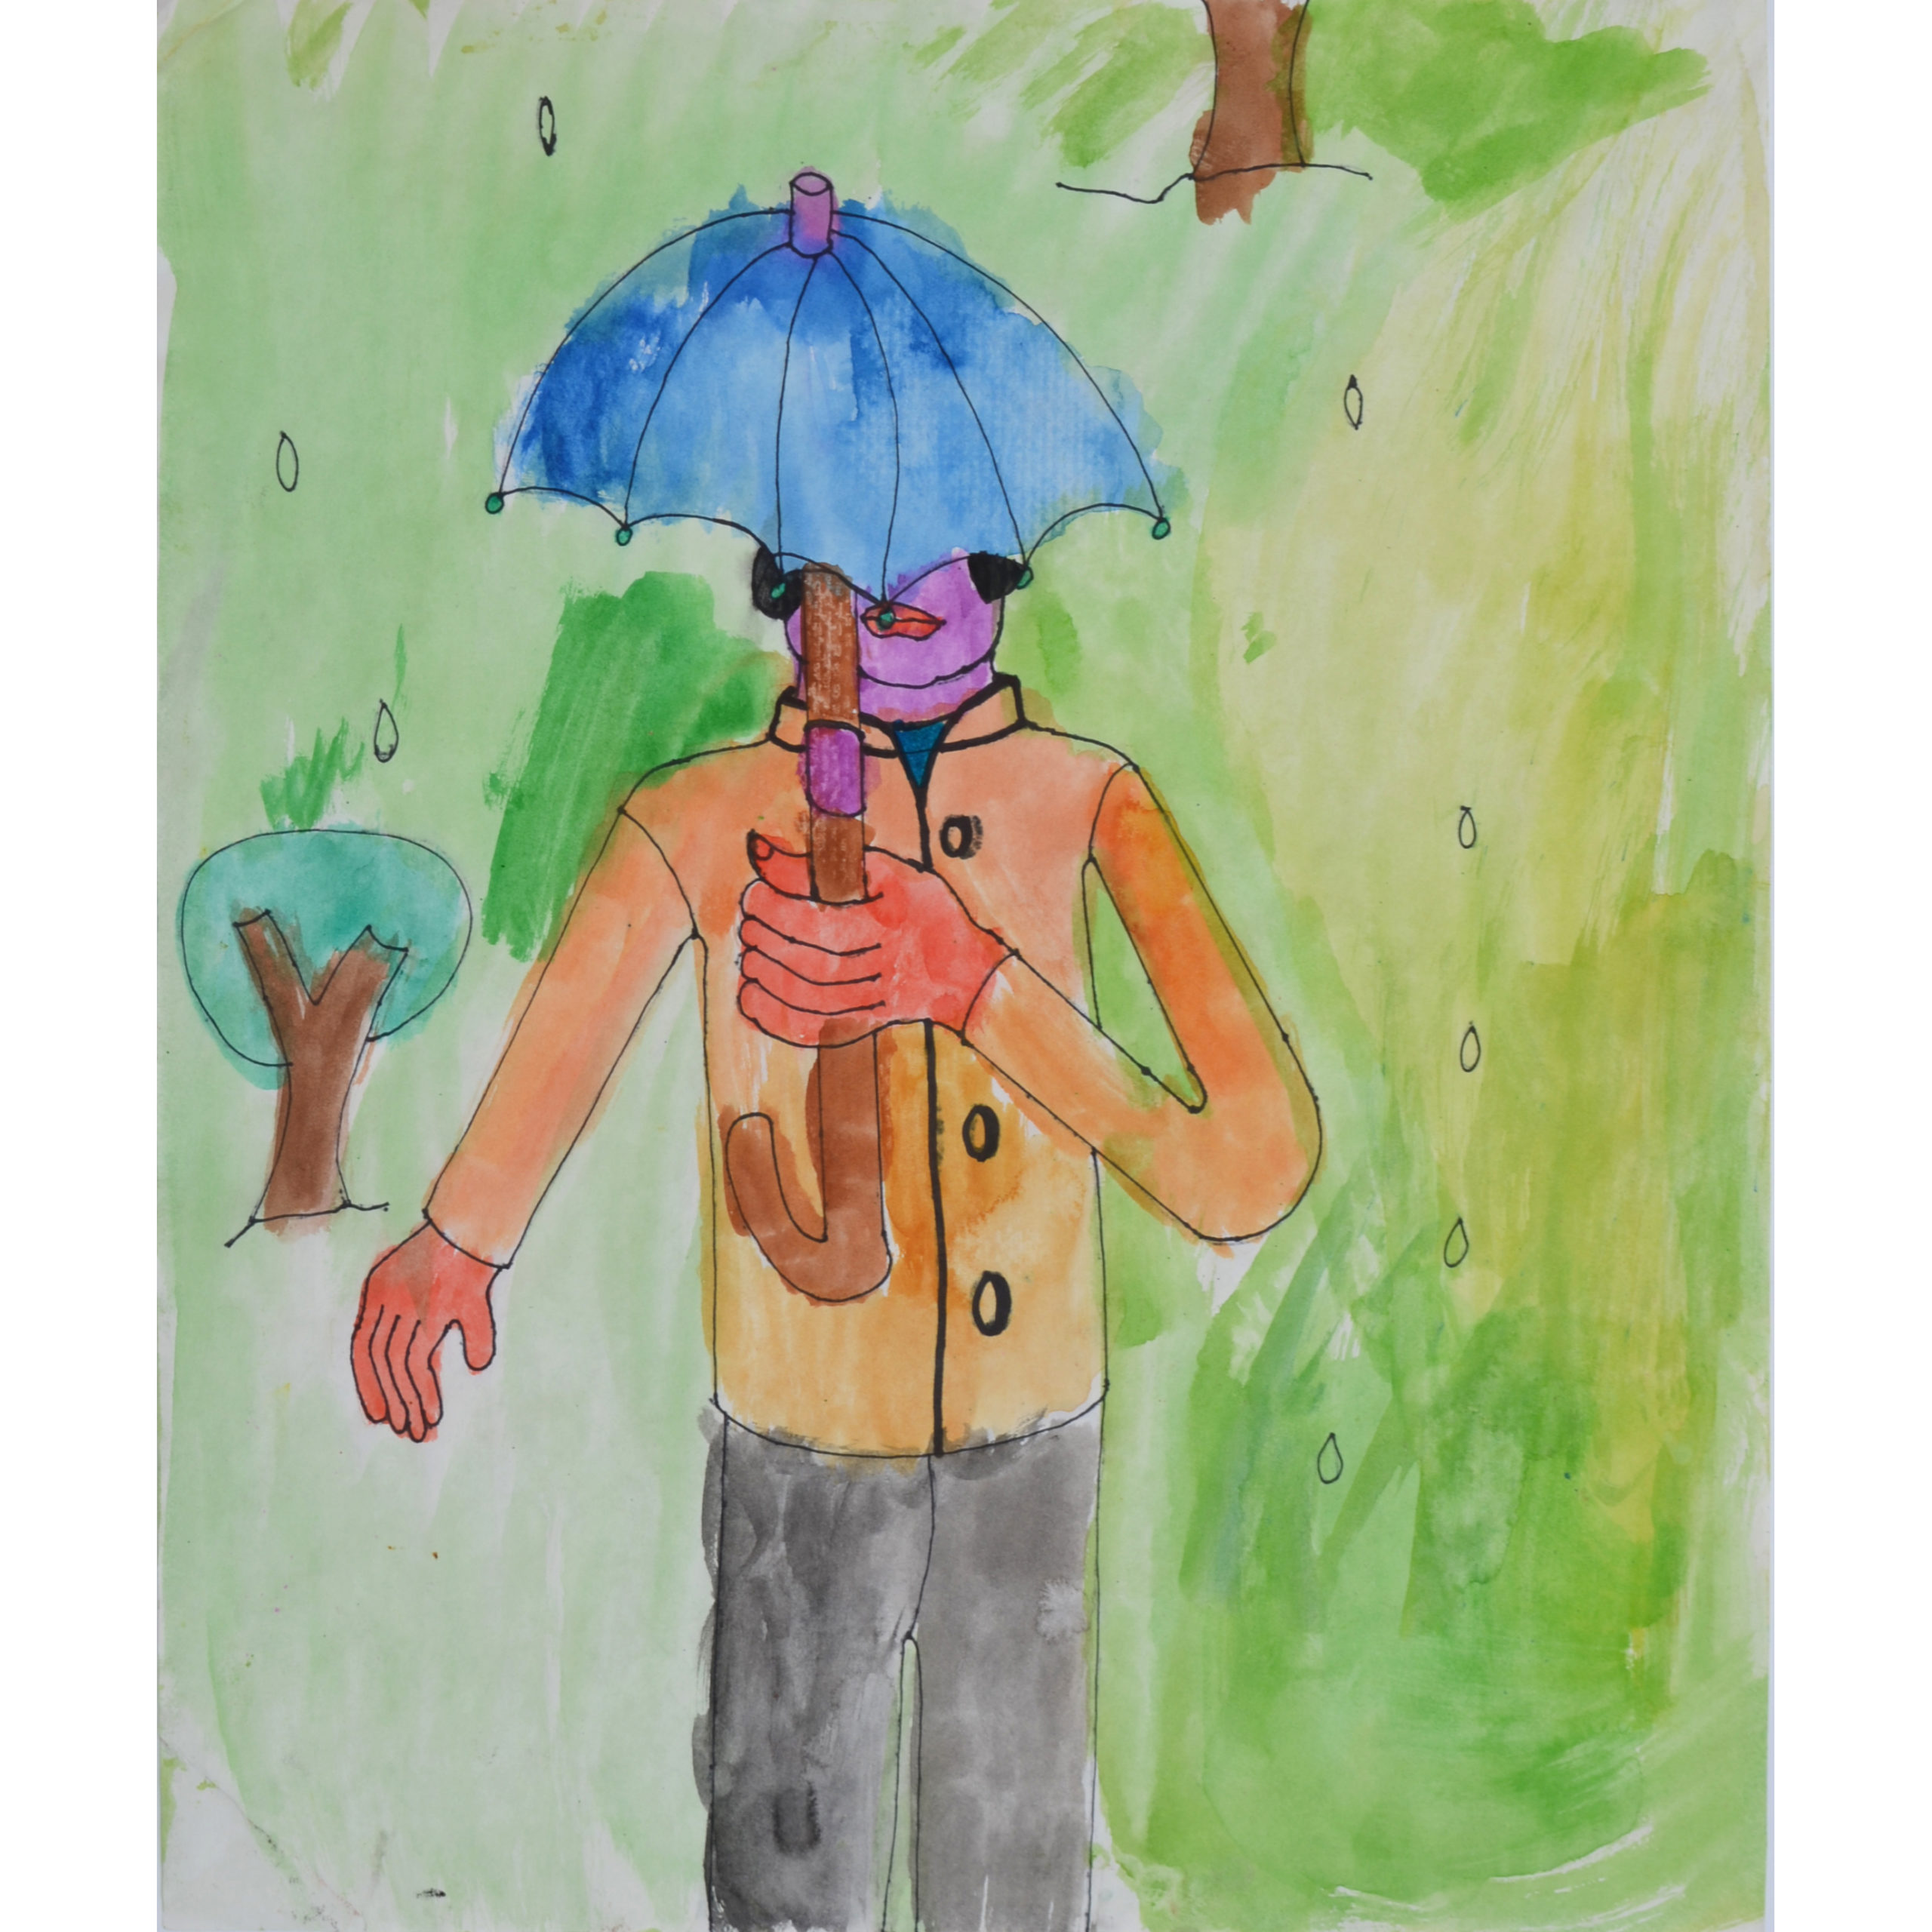 Untitled person with umbrella by Cathy Anderson